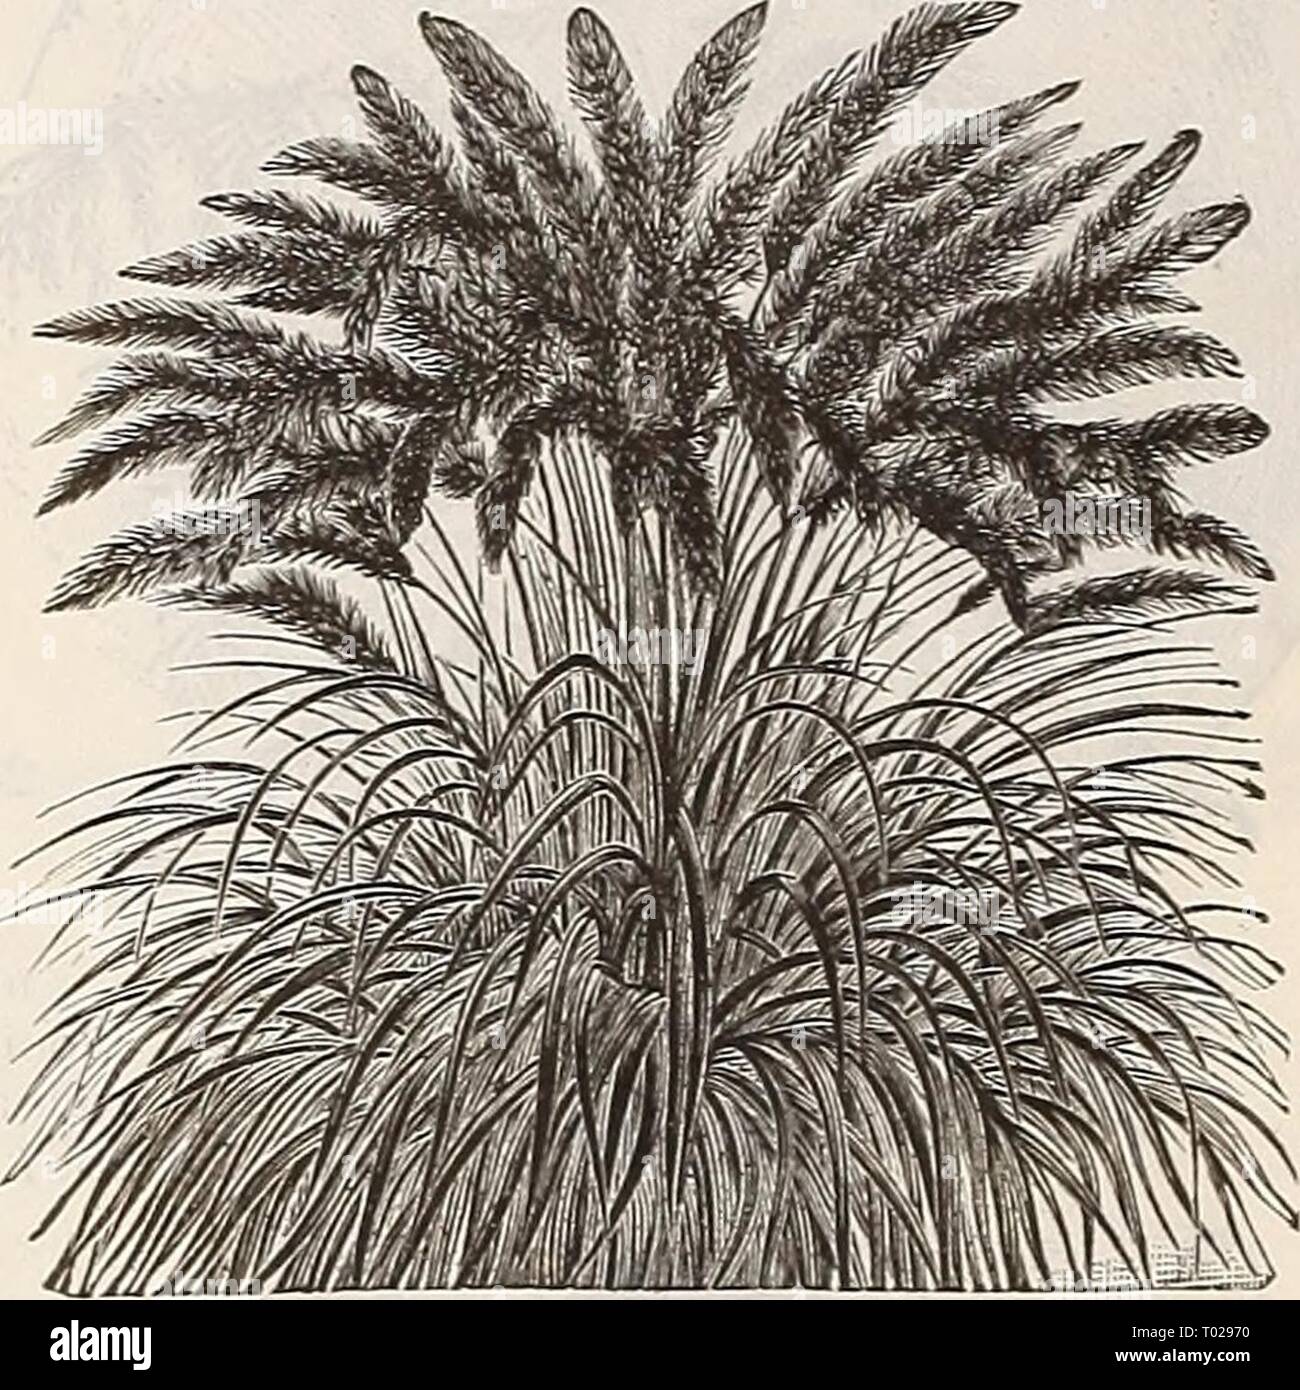 Dreer's garden calendar : 1900 . dreersgardencale1900henr Year: 1900  PER PKT. 2641 B r i z a Maxima {Quaking Grass). In great demand for ornamental work and grass bouquets.. . 5 2642 B r o ui u s Brizaefor- mis. A graceful variety, , with drooping panicles; per- ennial 5 2644 Coix liachrymae {Job'sTears). Broad, corn- like leaves and hard, shin- ing, pearly seeds; annual. Per oz.. 15 cts 5 2646 Erianthus Raven- use. Perennial ; exquisite plumes resembling the Pam- pas. Fine for lawns ; flow- ers first season if sown early 5 2647 Eulalia Z e b r i n a. Light green, barred with creamy white. Va Stock Photo